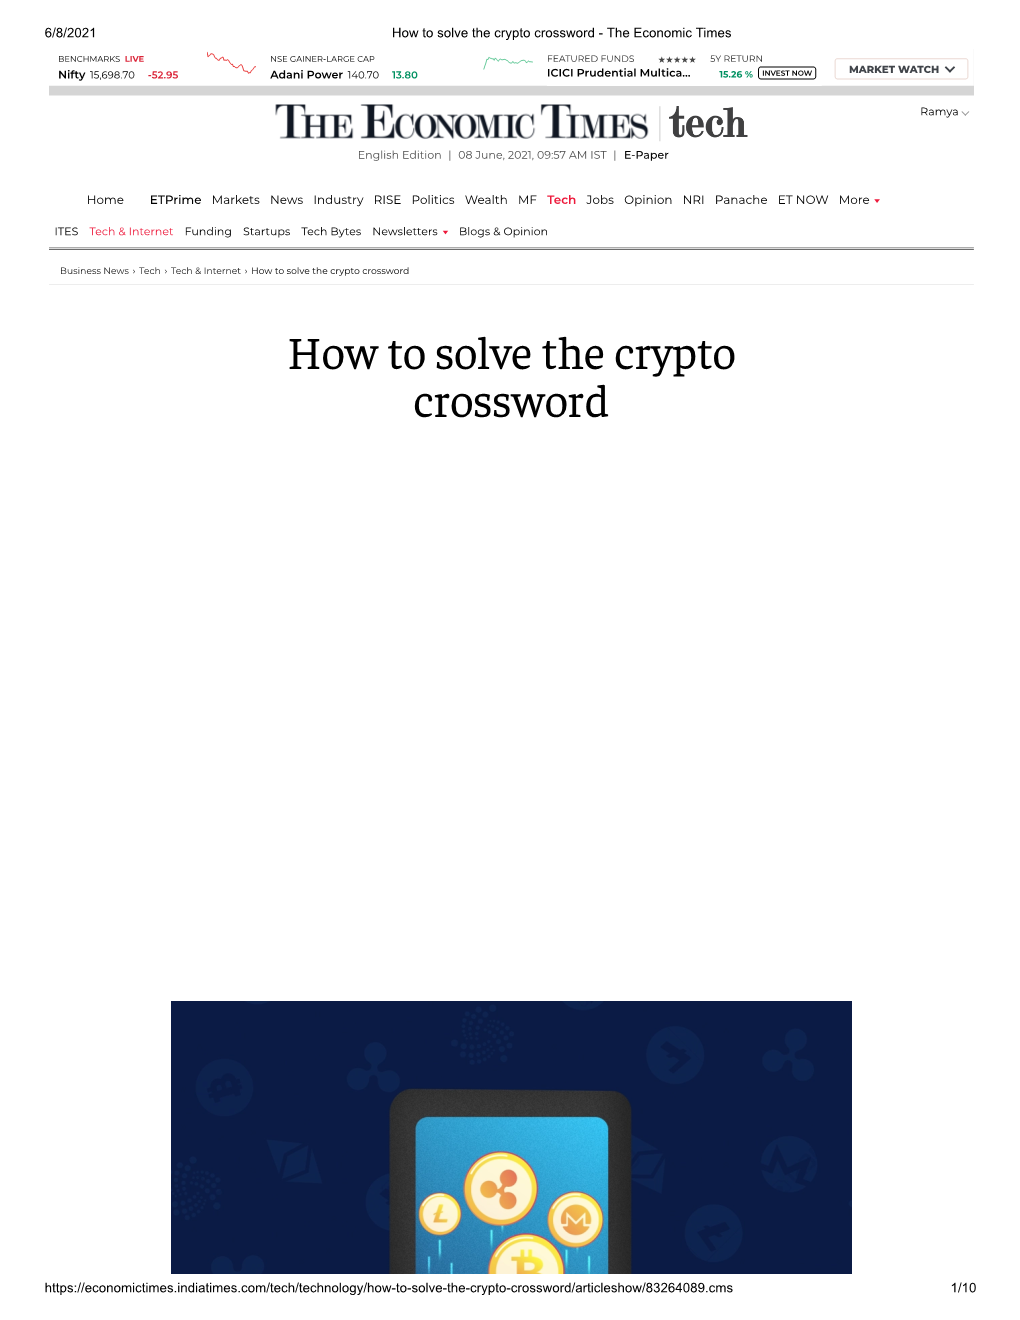 How to Solve the Crypto Crossword - the Economic Times